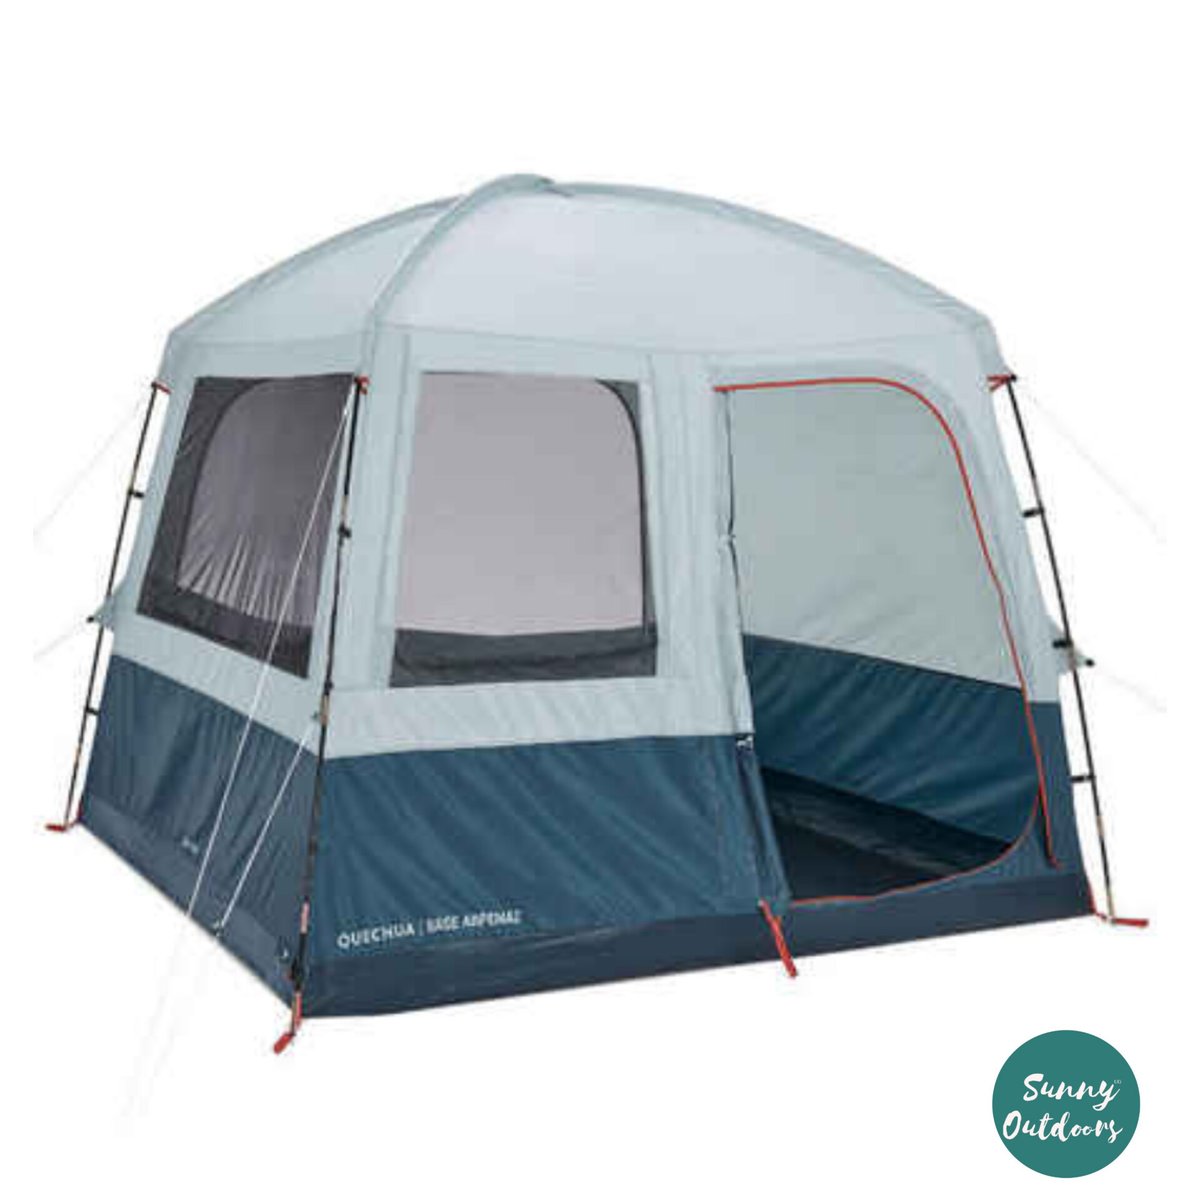 The Arpenaz Base M living room is a great choice for campers seeking to expand sheltered space and protect against bad weather and insects. It comfortably accommodates up to six campers and provides a versatile and weather-resistant environment for outdoor activities. Follow this…